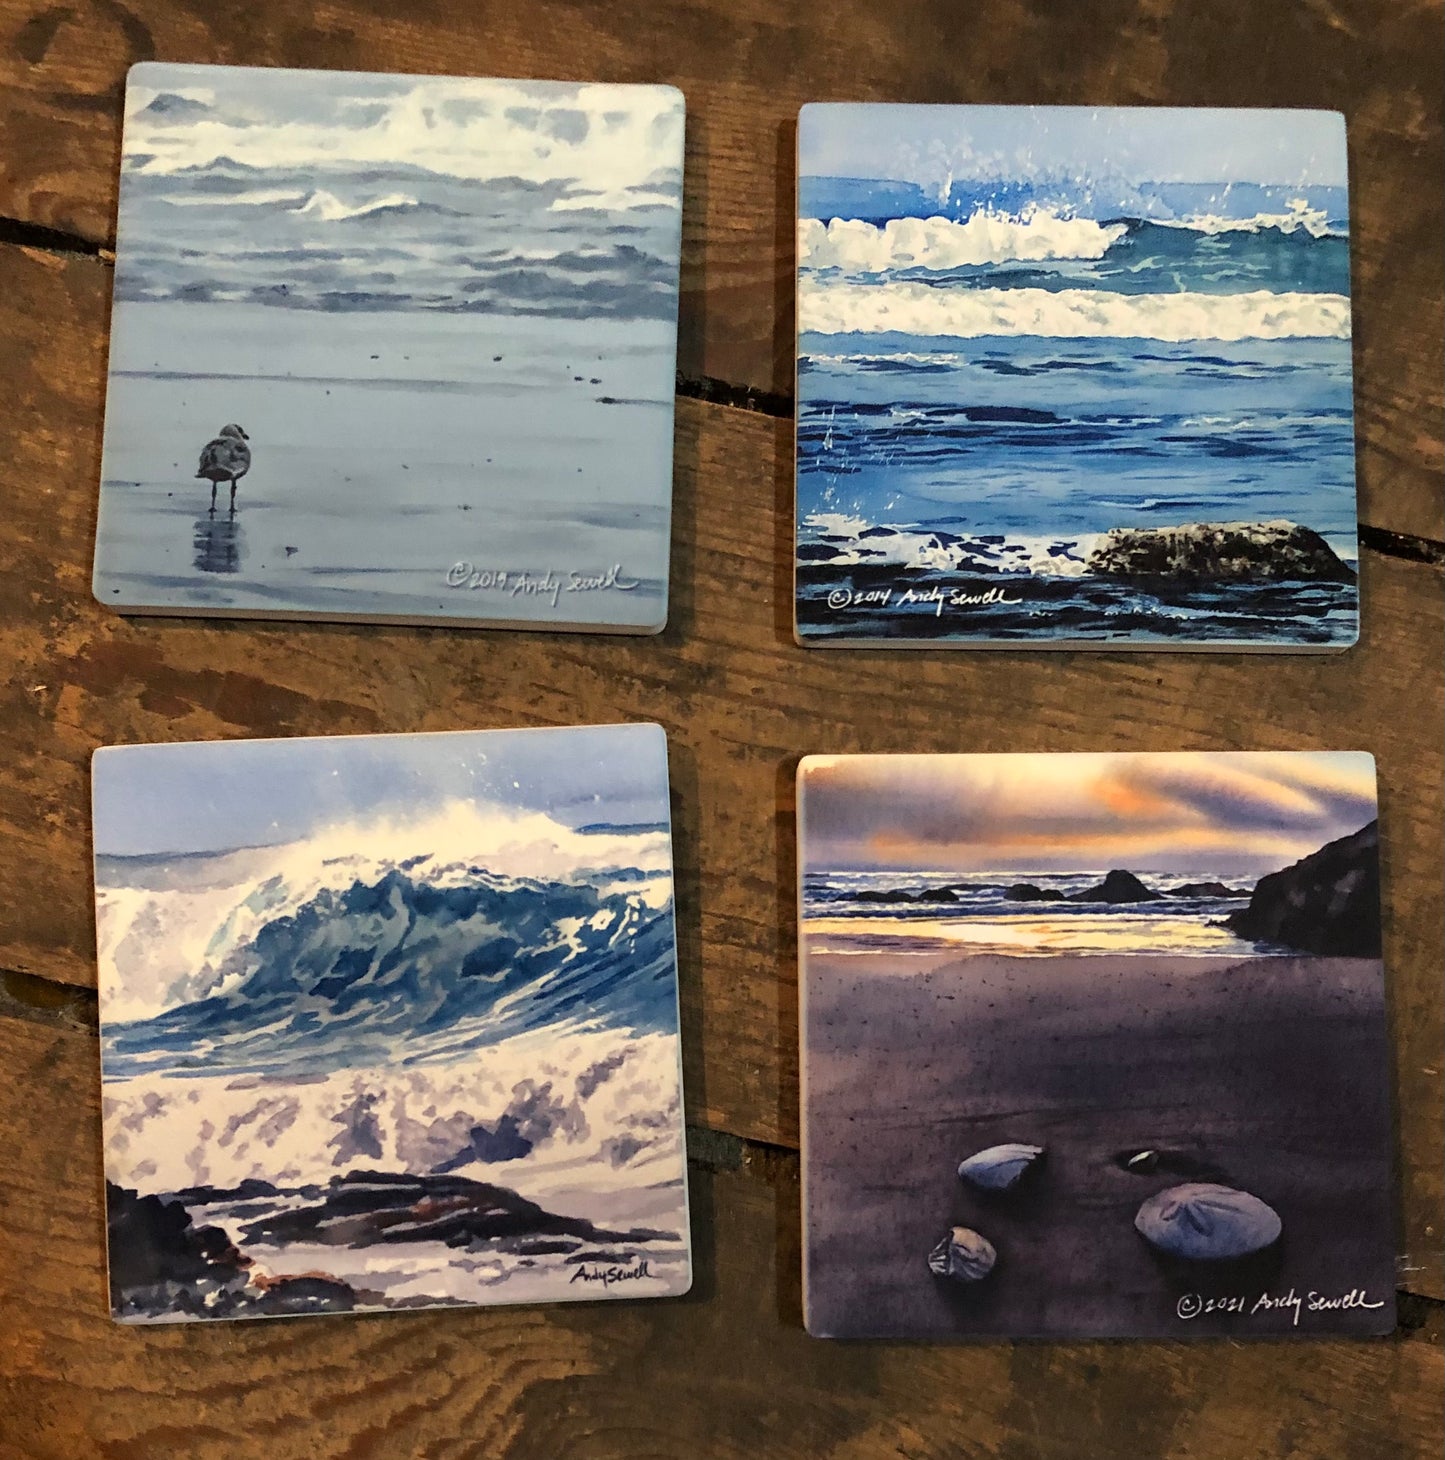 "Ocean waves" themed coaster sets of 4